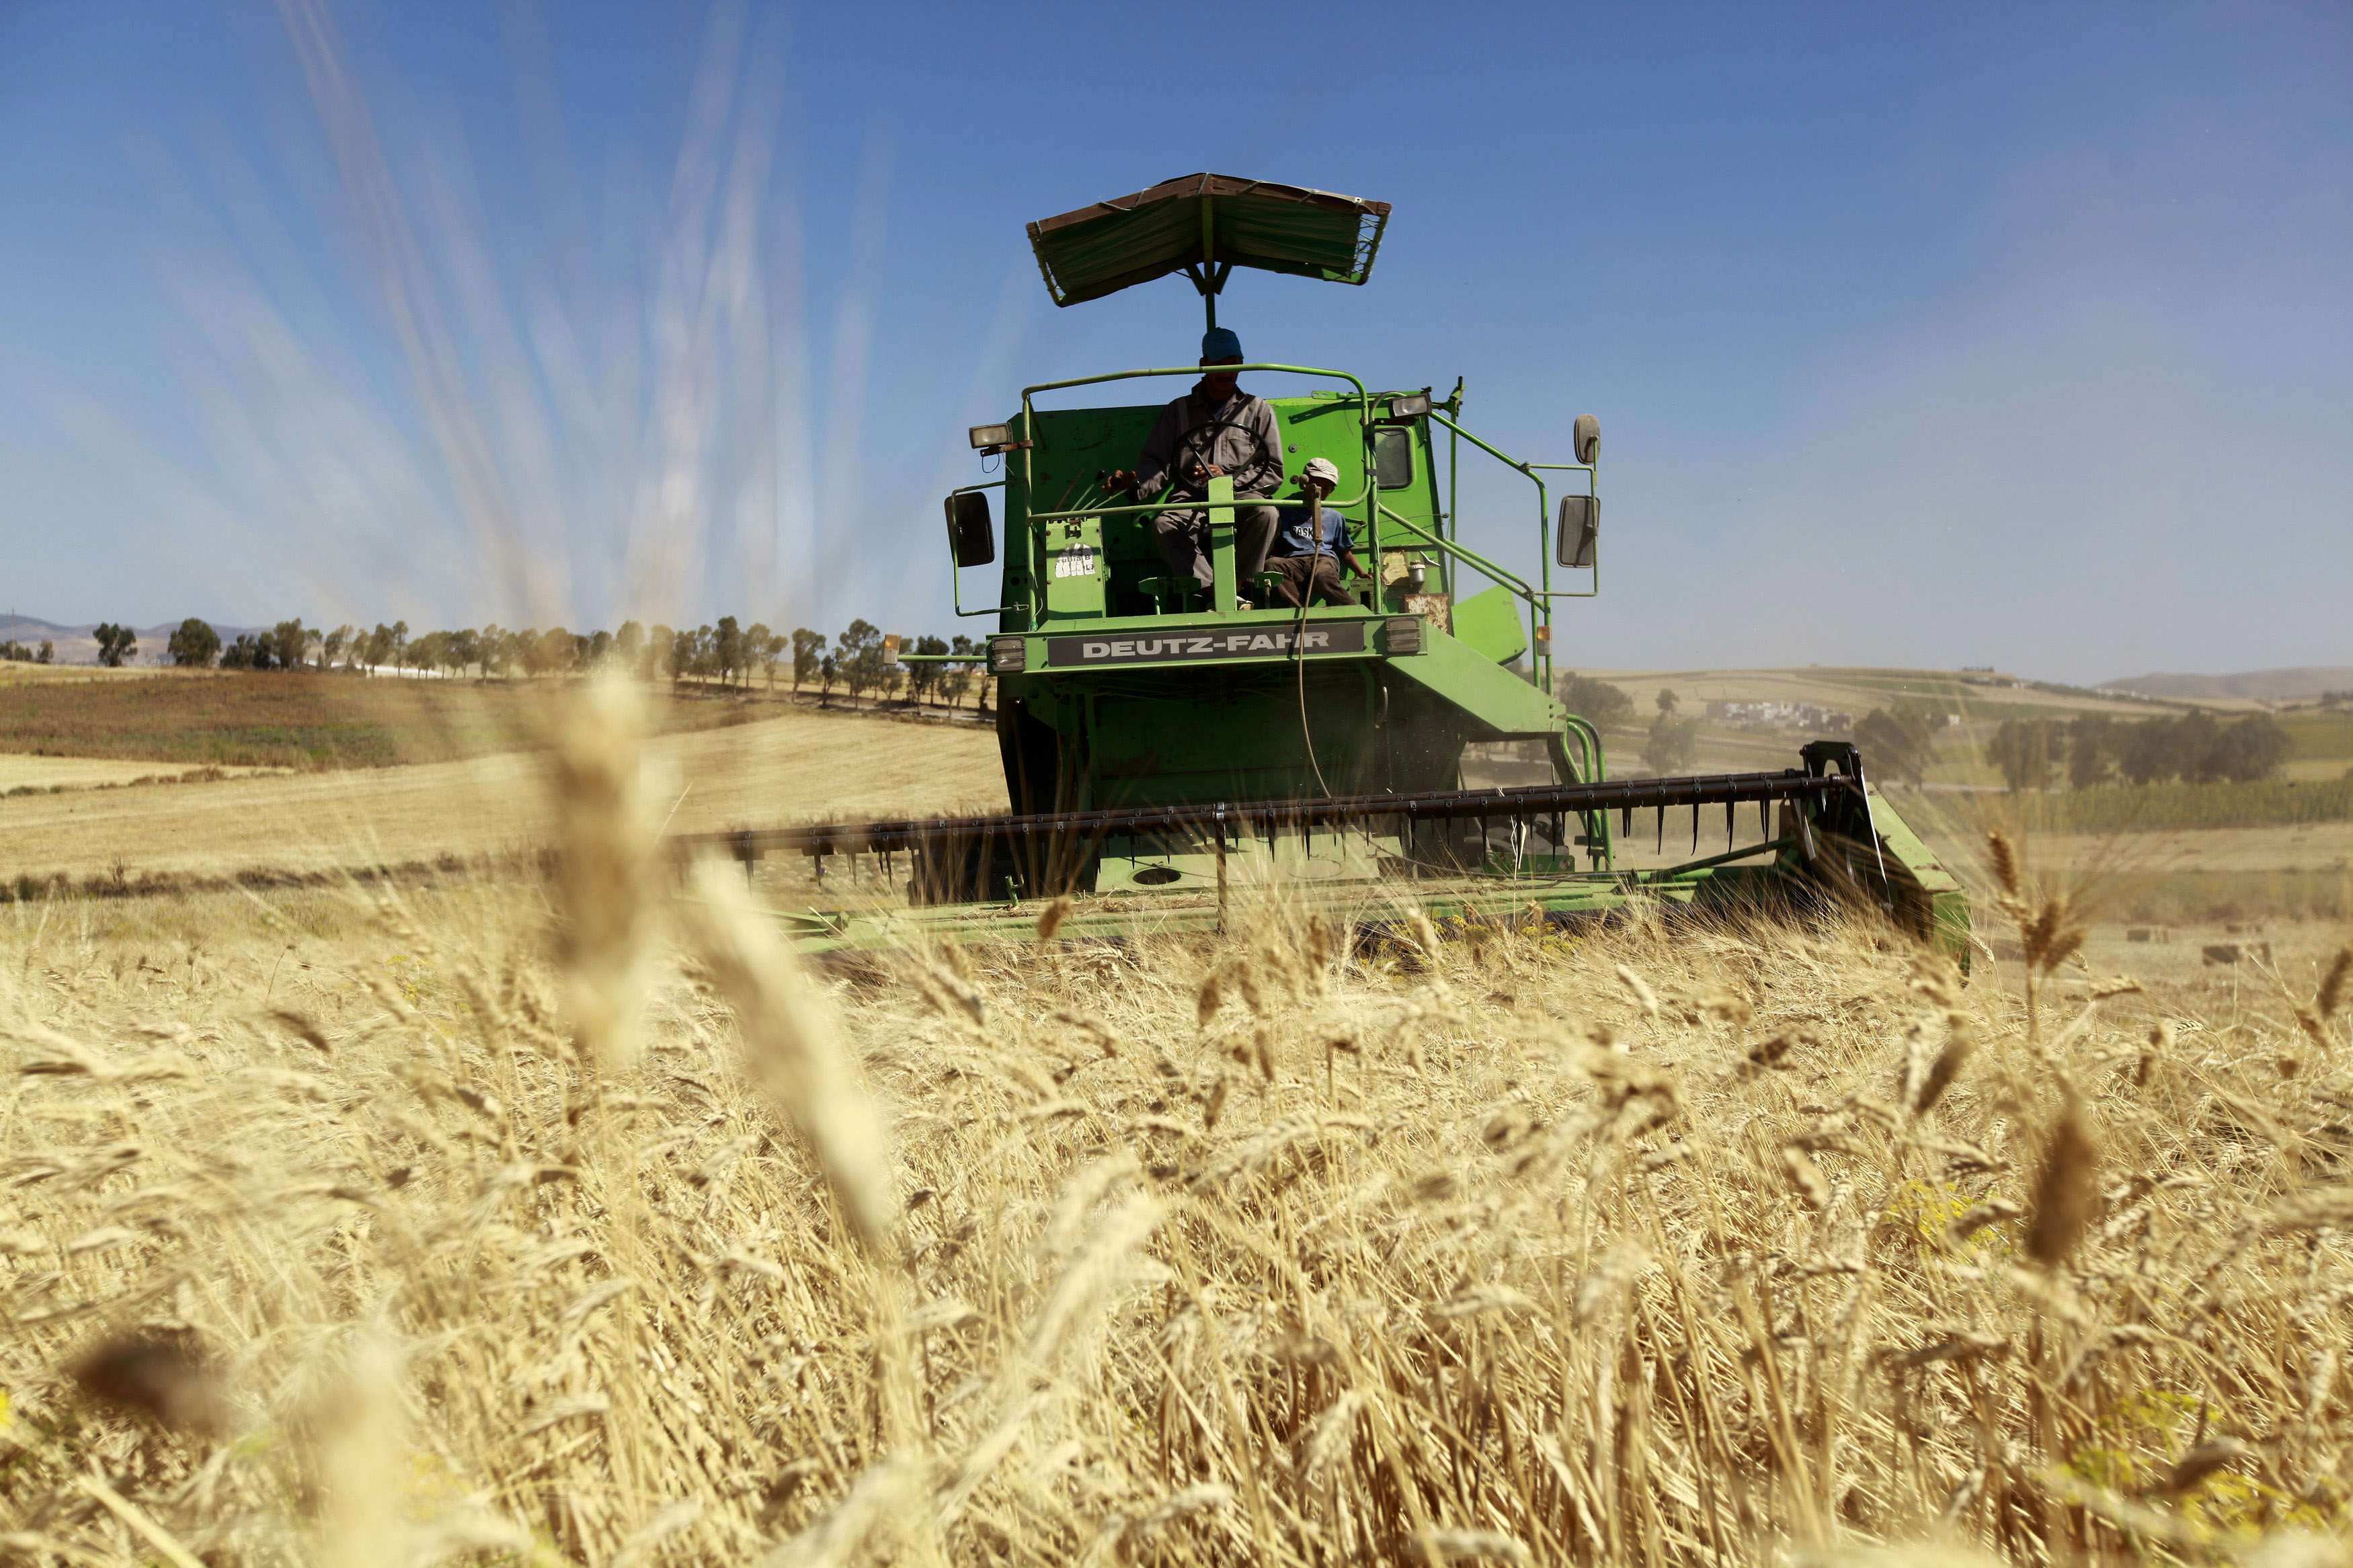 US says rogue wheat was 'isolated' incident